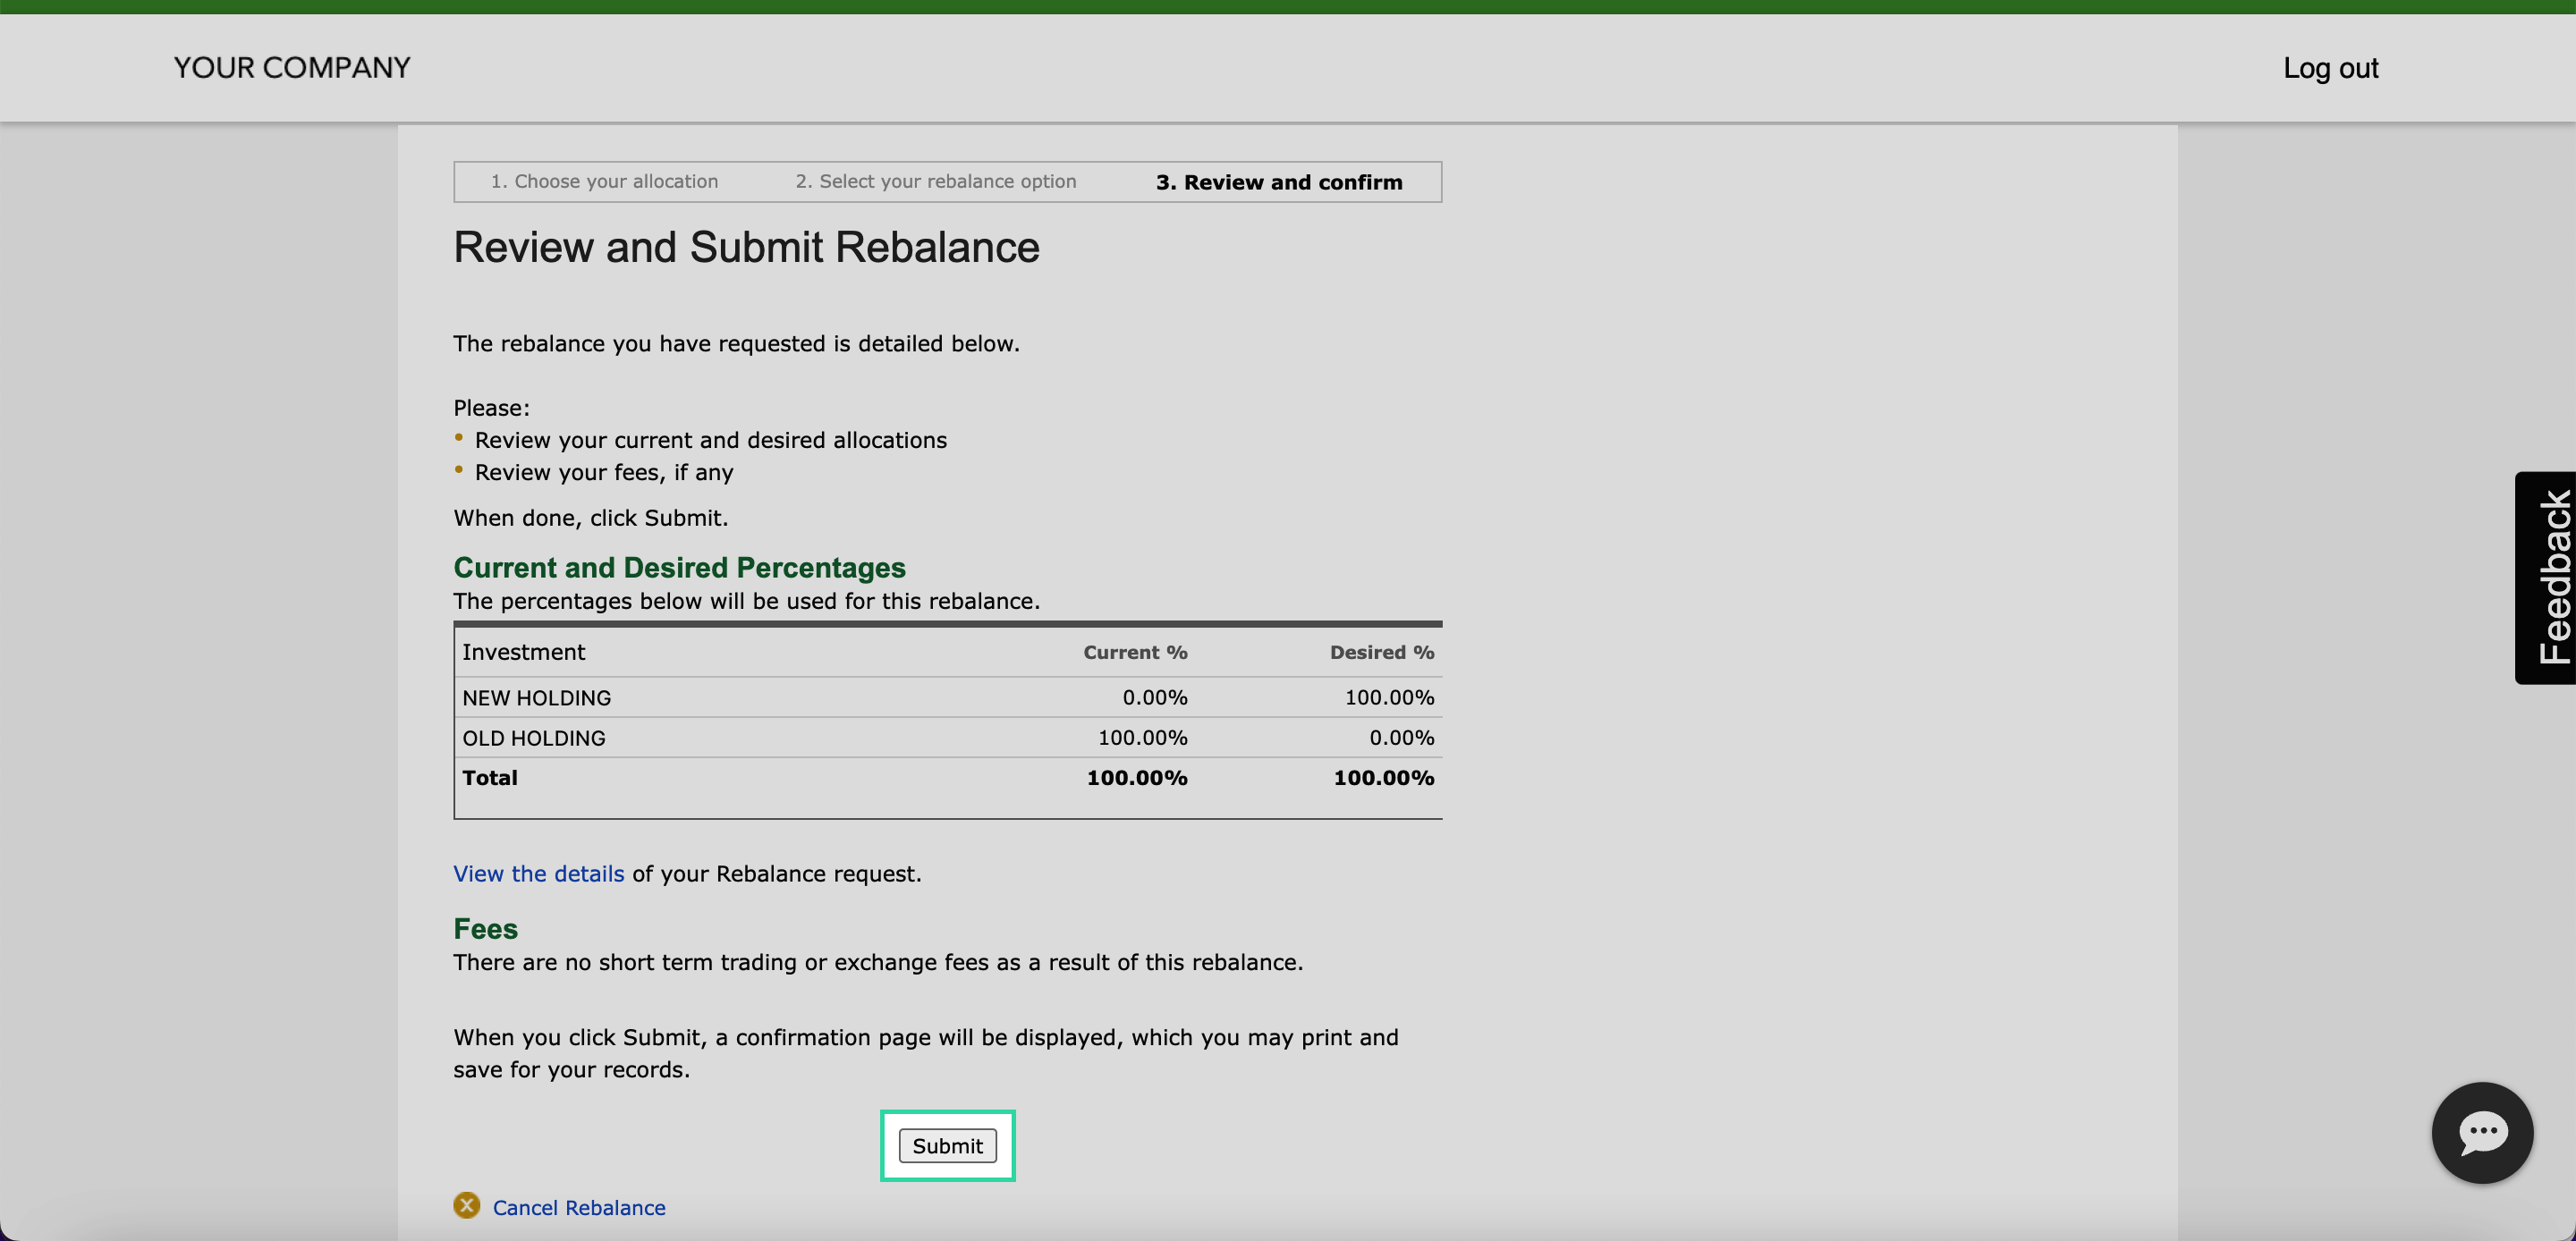 Review your changes, and click on “Submit”. You’re all done!